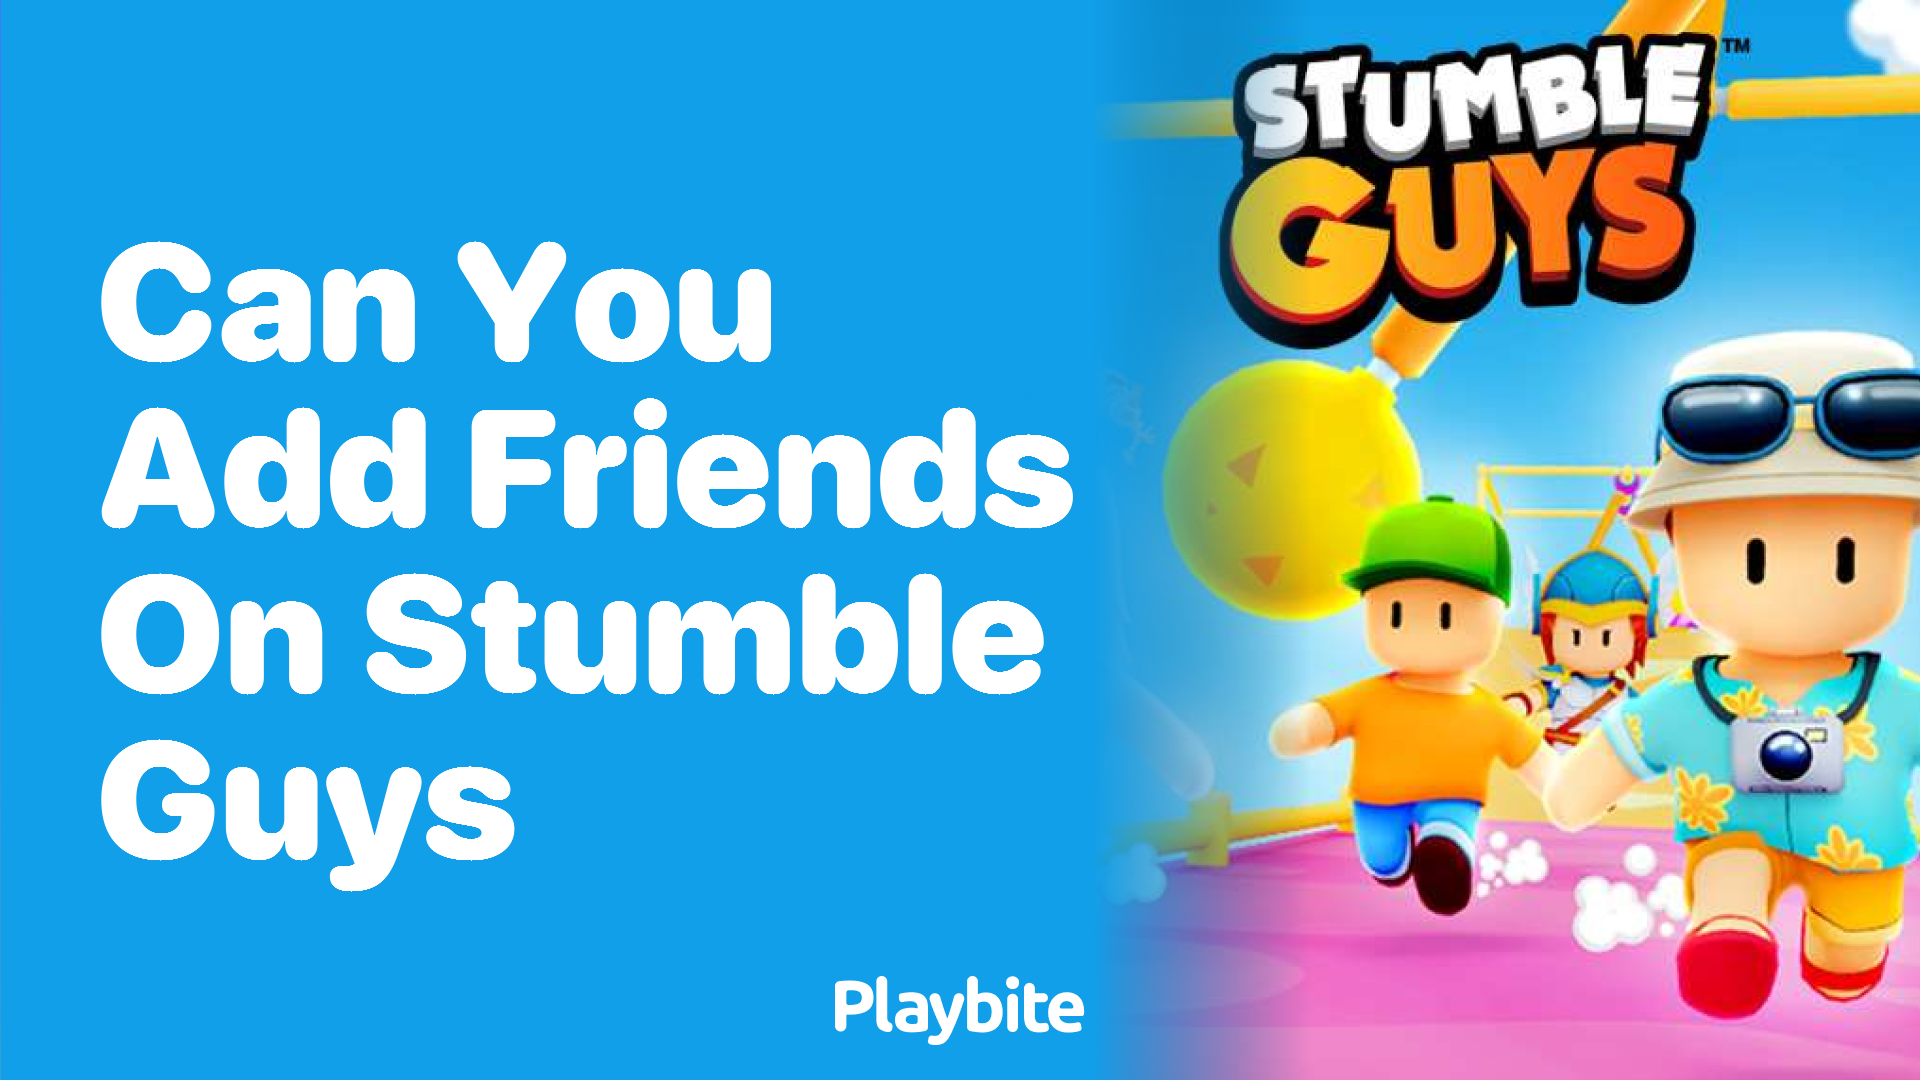 Can you Add Friends on Stumble Guys? A Quick Guide